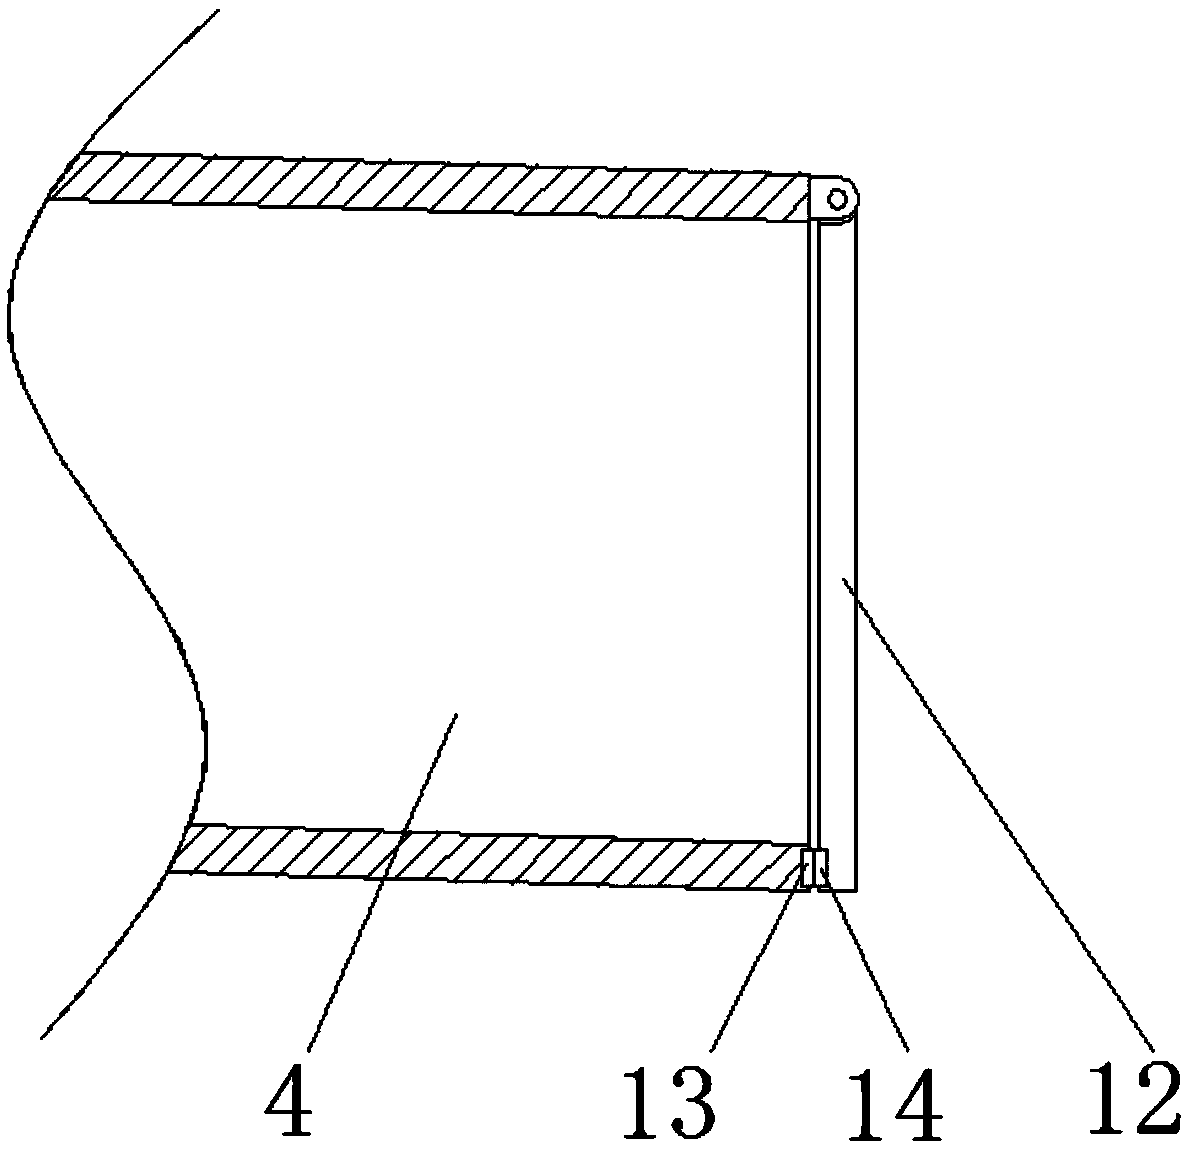 Road structure with surface type water collecting function